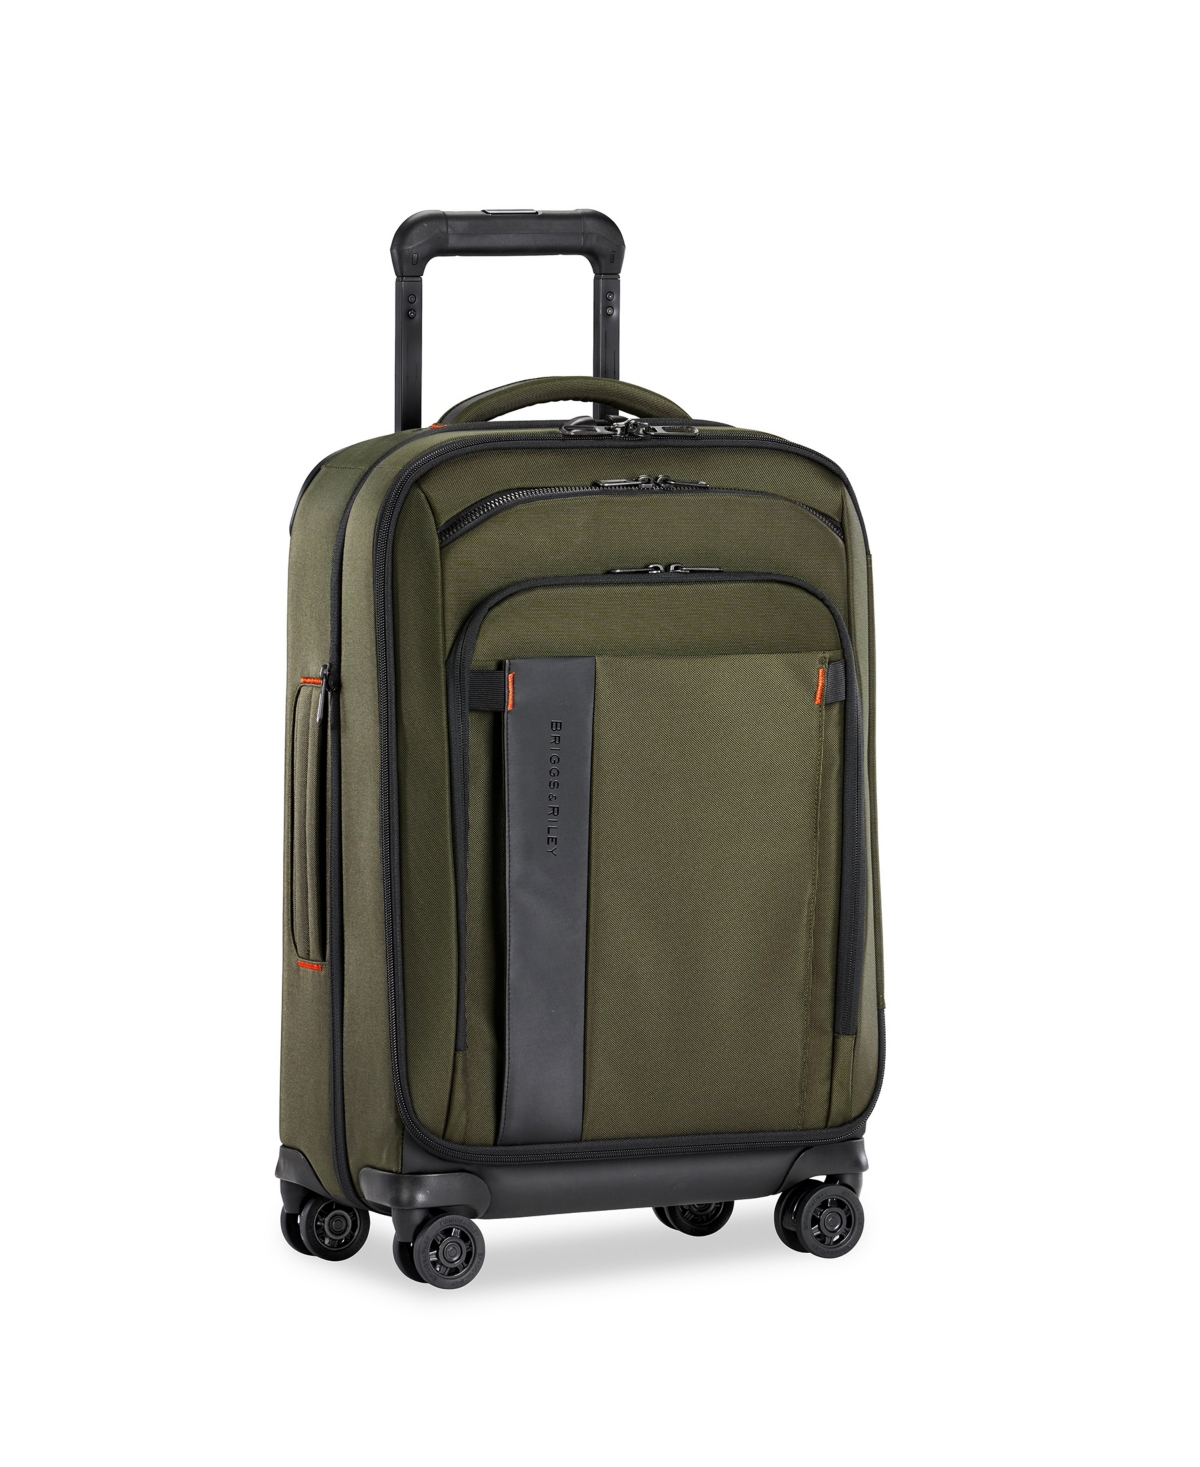 Zdx 22" Carry-on Expandable Spinner - Ocean